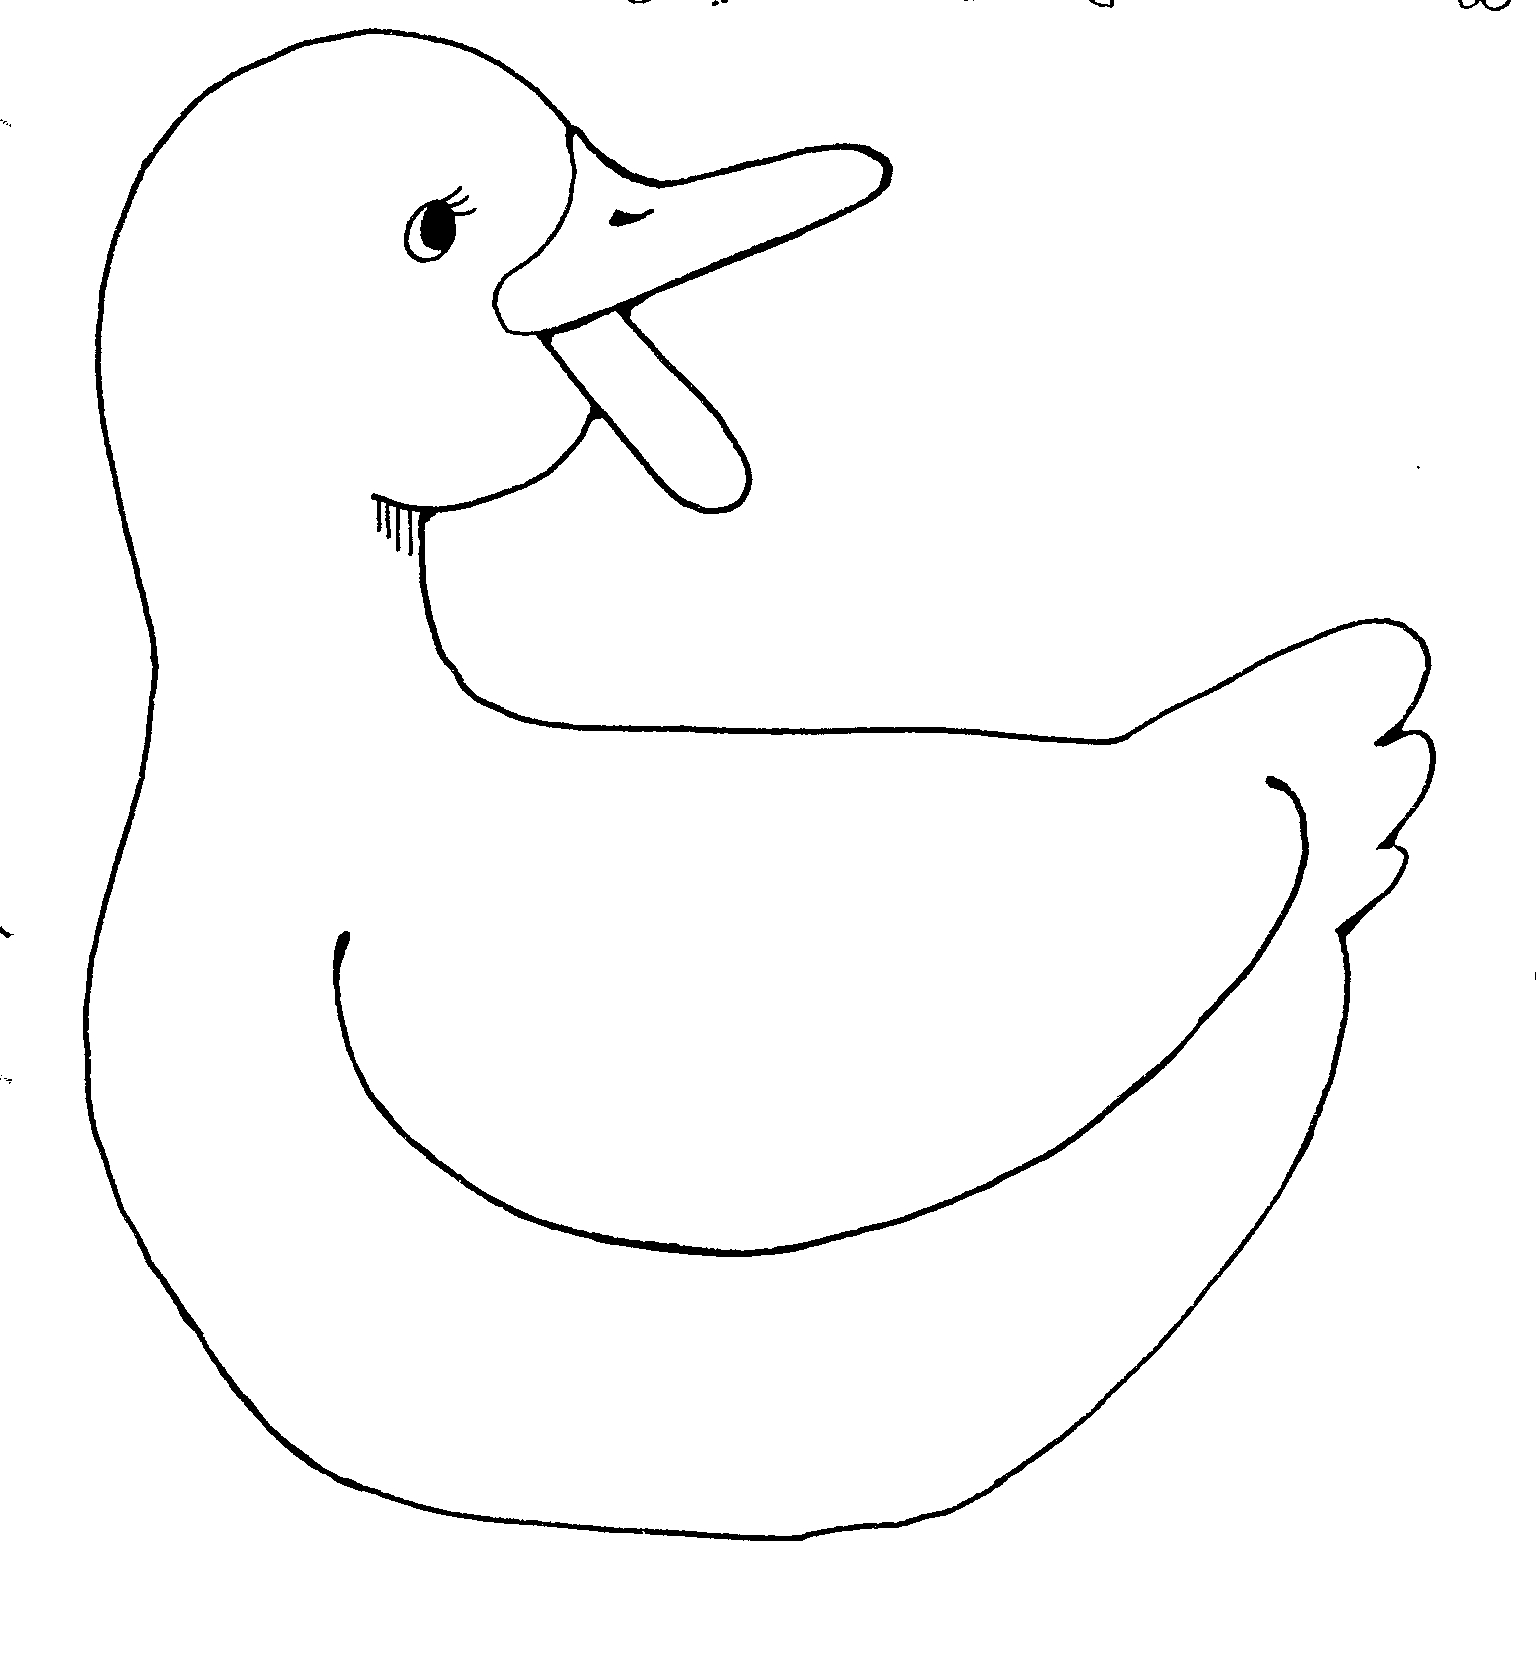 Printable Duck Clipart Black And White Just go Inalong